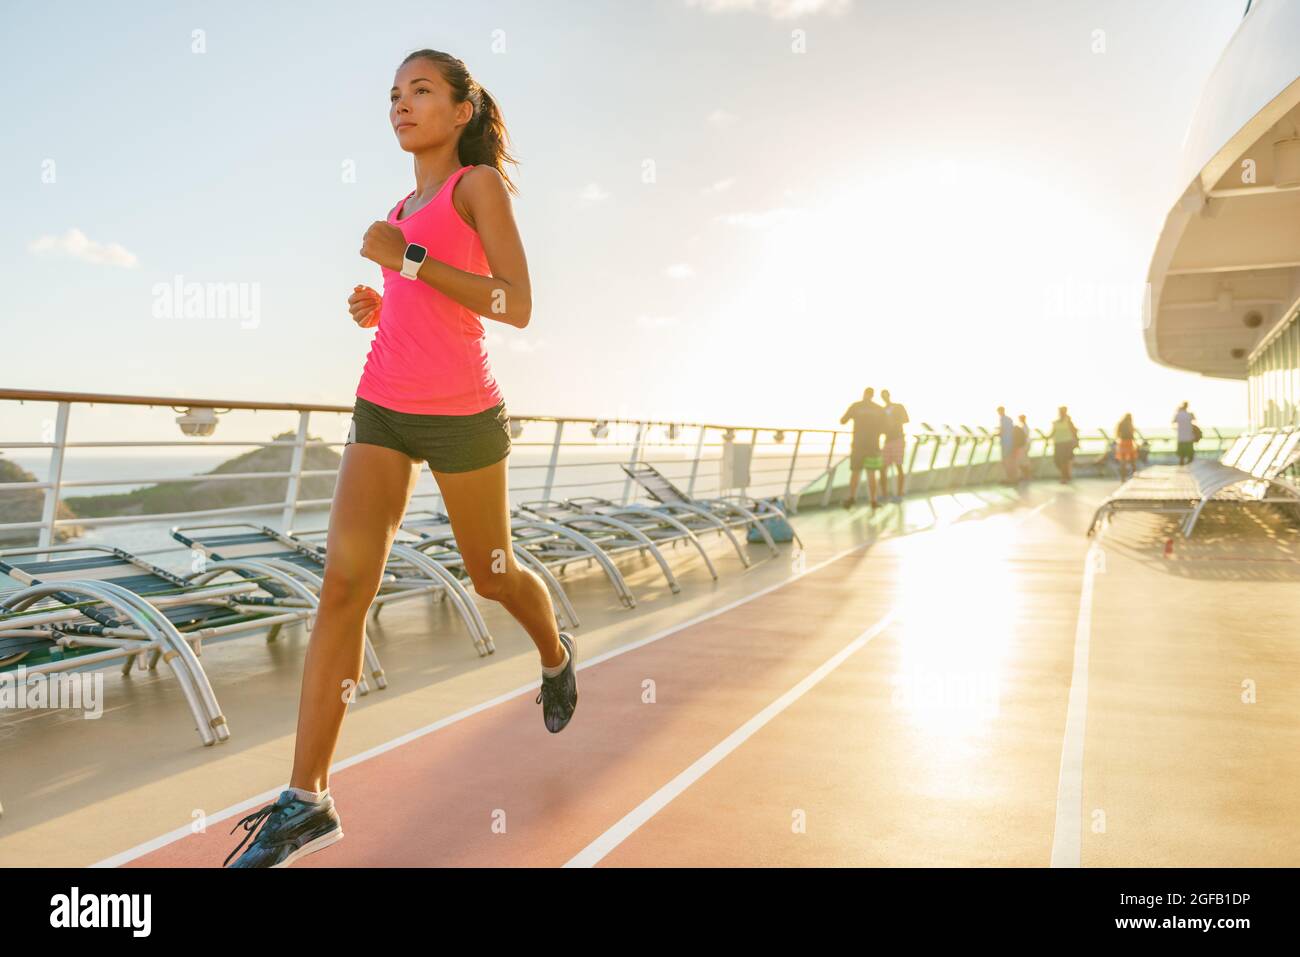 Cruise fitness running young woman jogging on deck tracks of Caribbean travel ship. Summer vacation active lifestyle Stock Photo